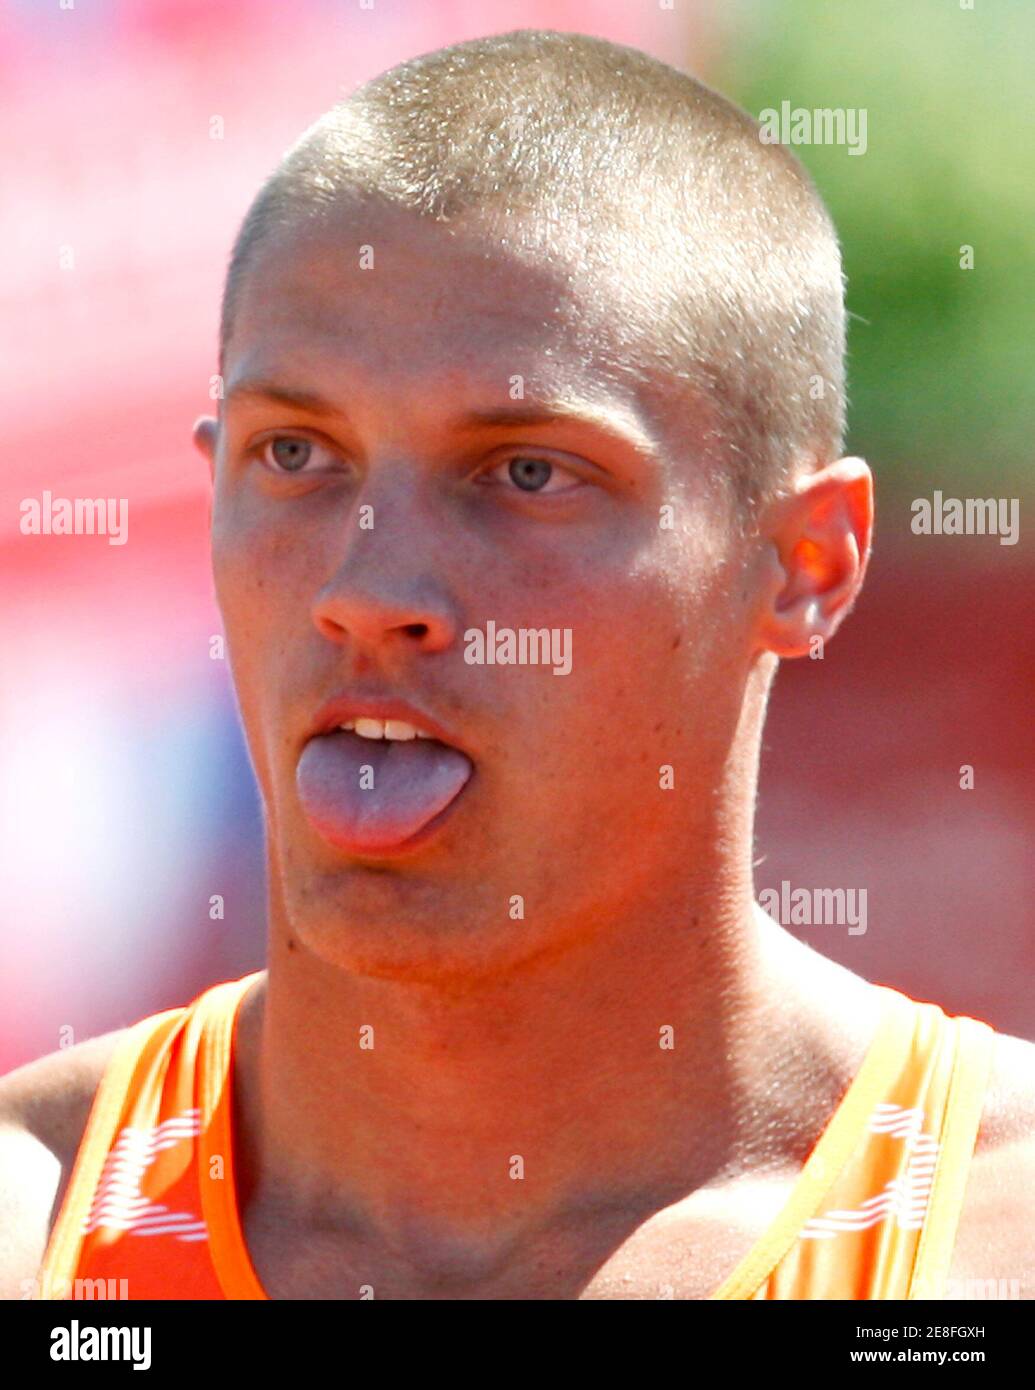 Trey Hardee of the USA reacts after the 100m event at the two-day international decathlon meeting in Goetzis May 30, 2009. REUTERS/Miro Kuzmanovic (AUSTRIA SPORT ATHLETICS) Stock Photo